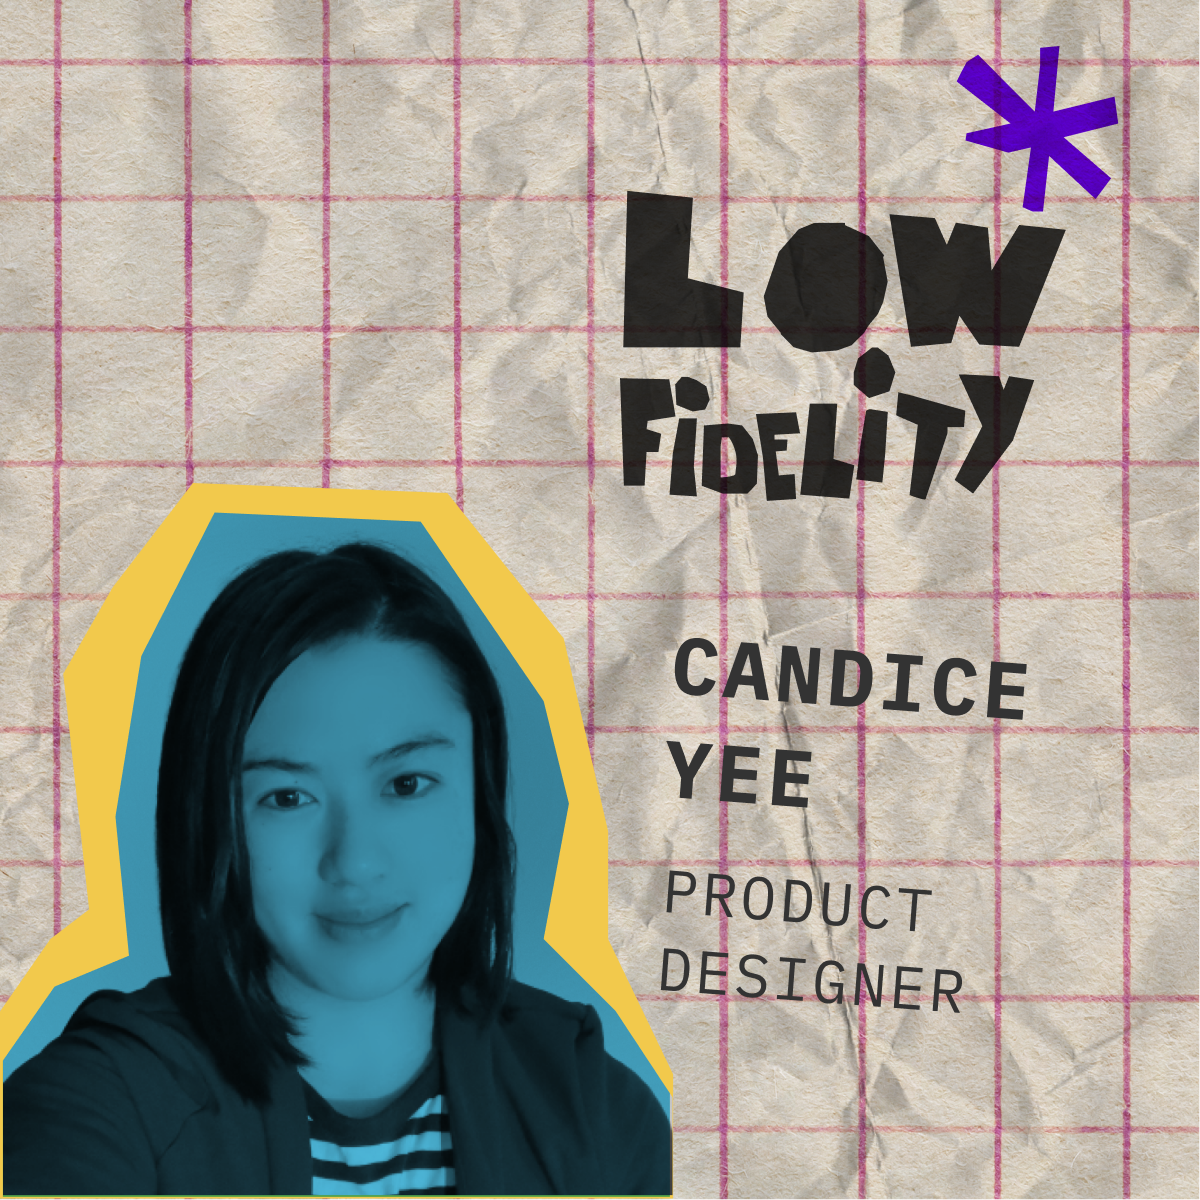 4. Taking action to make opportunities for yourself with Candice Yee